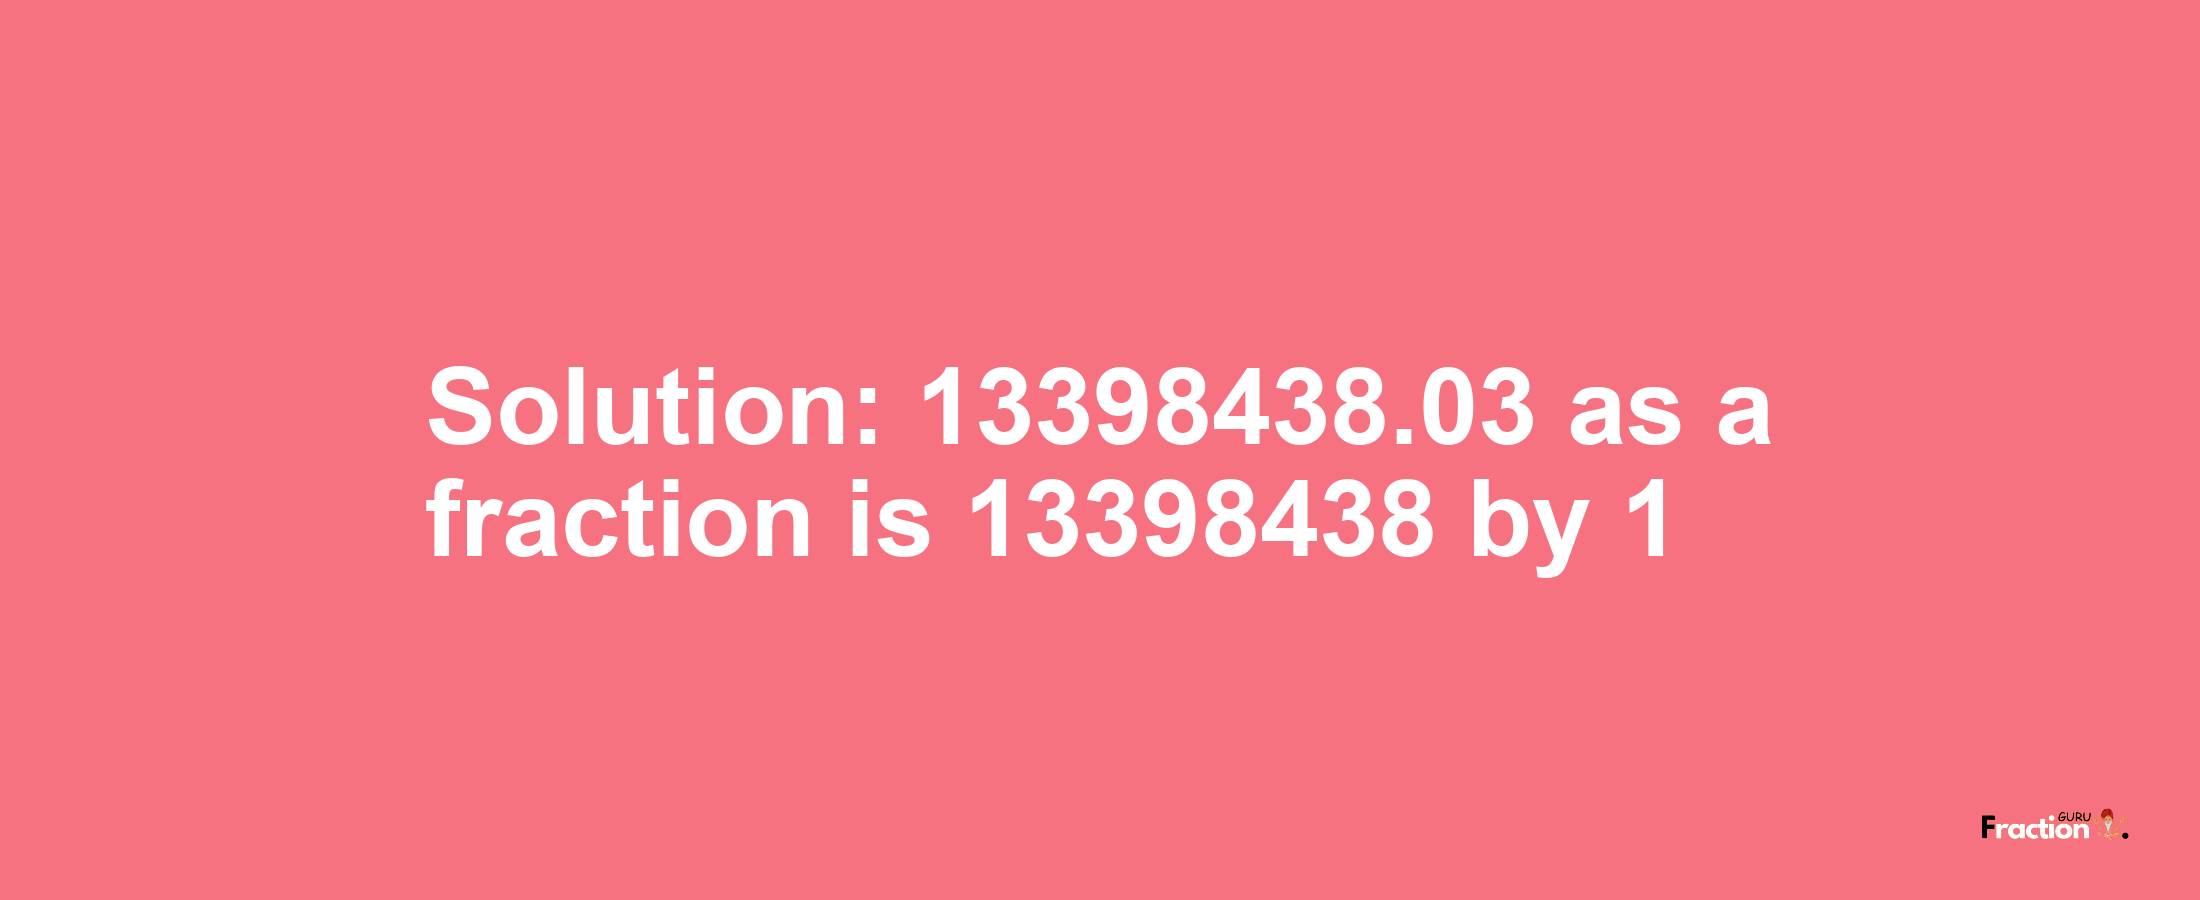 Solution:13398438.03 as a fraction is 13398438/1